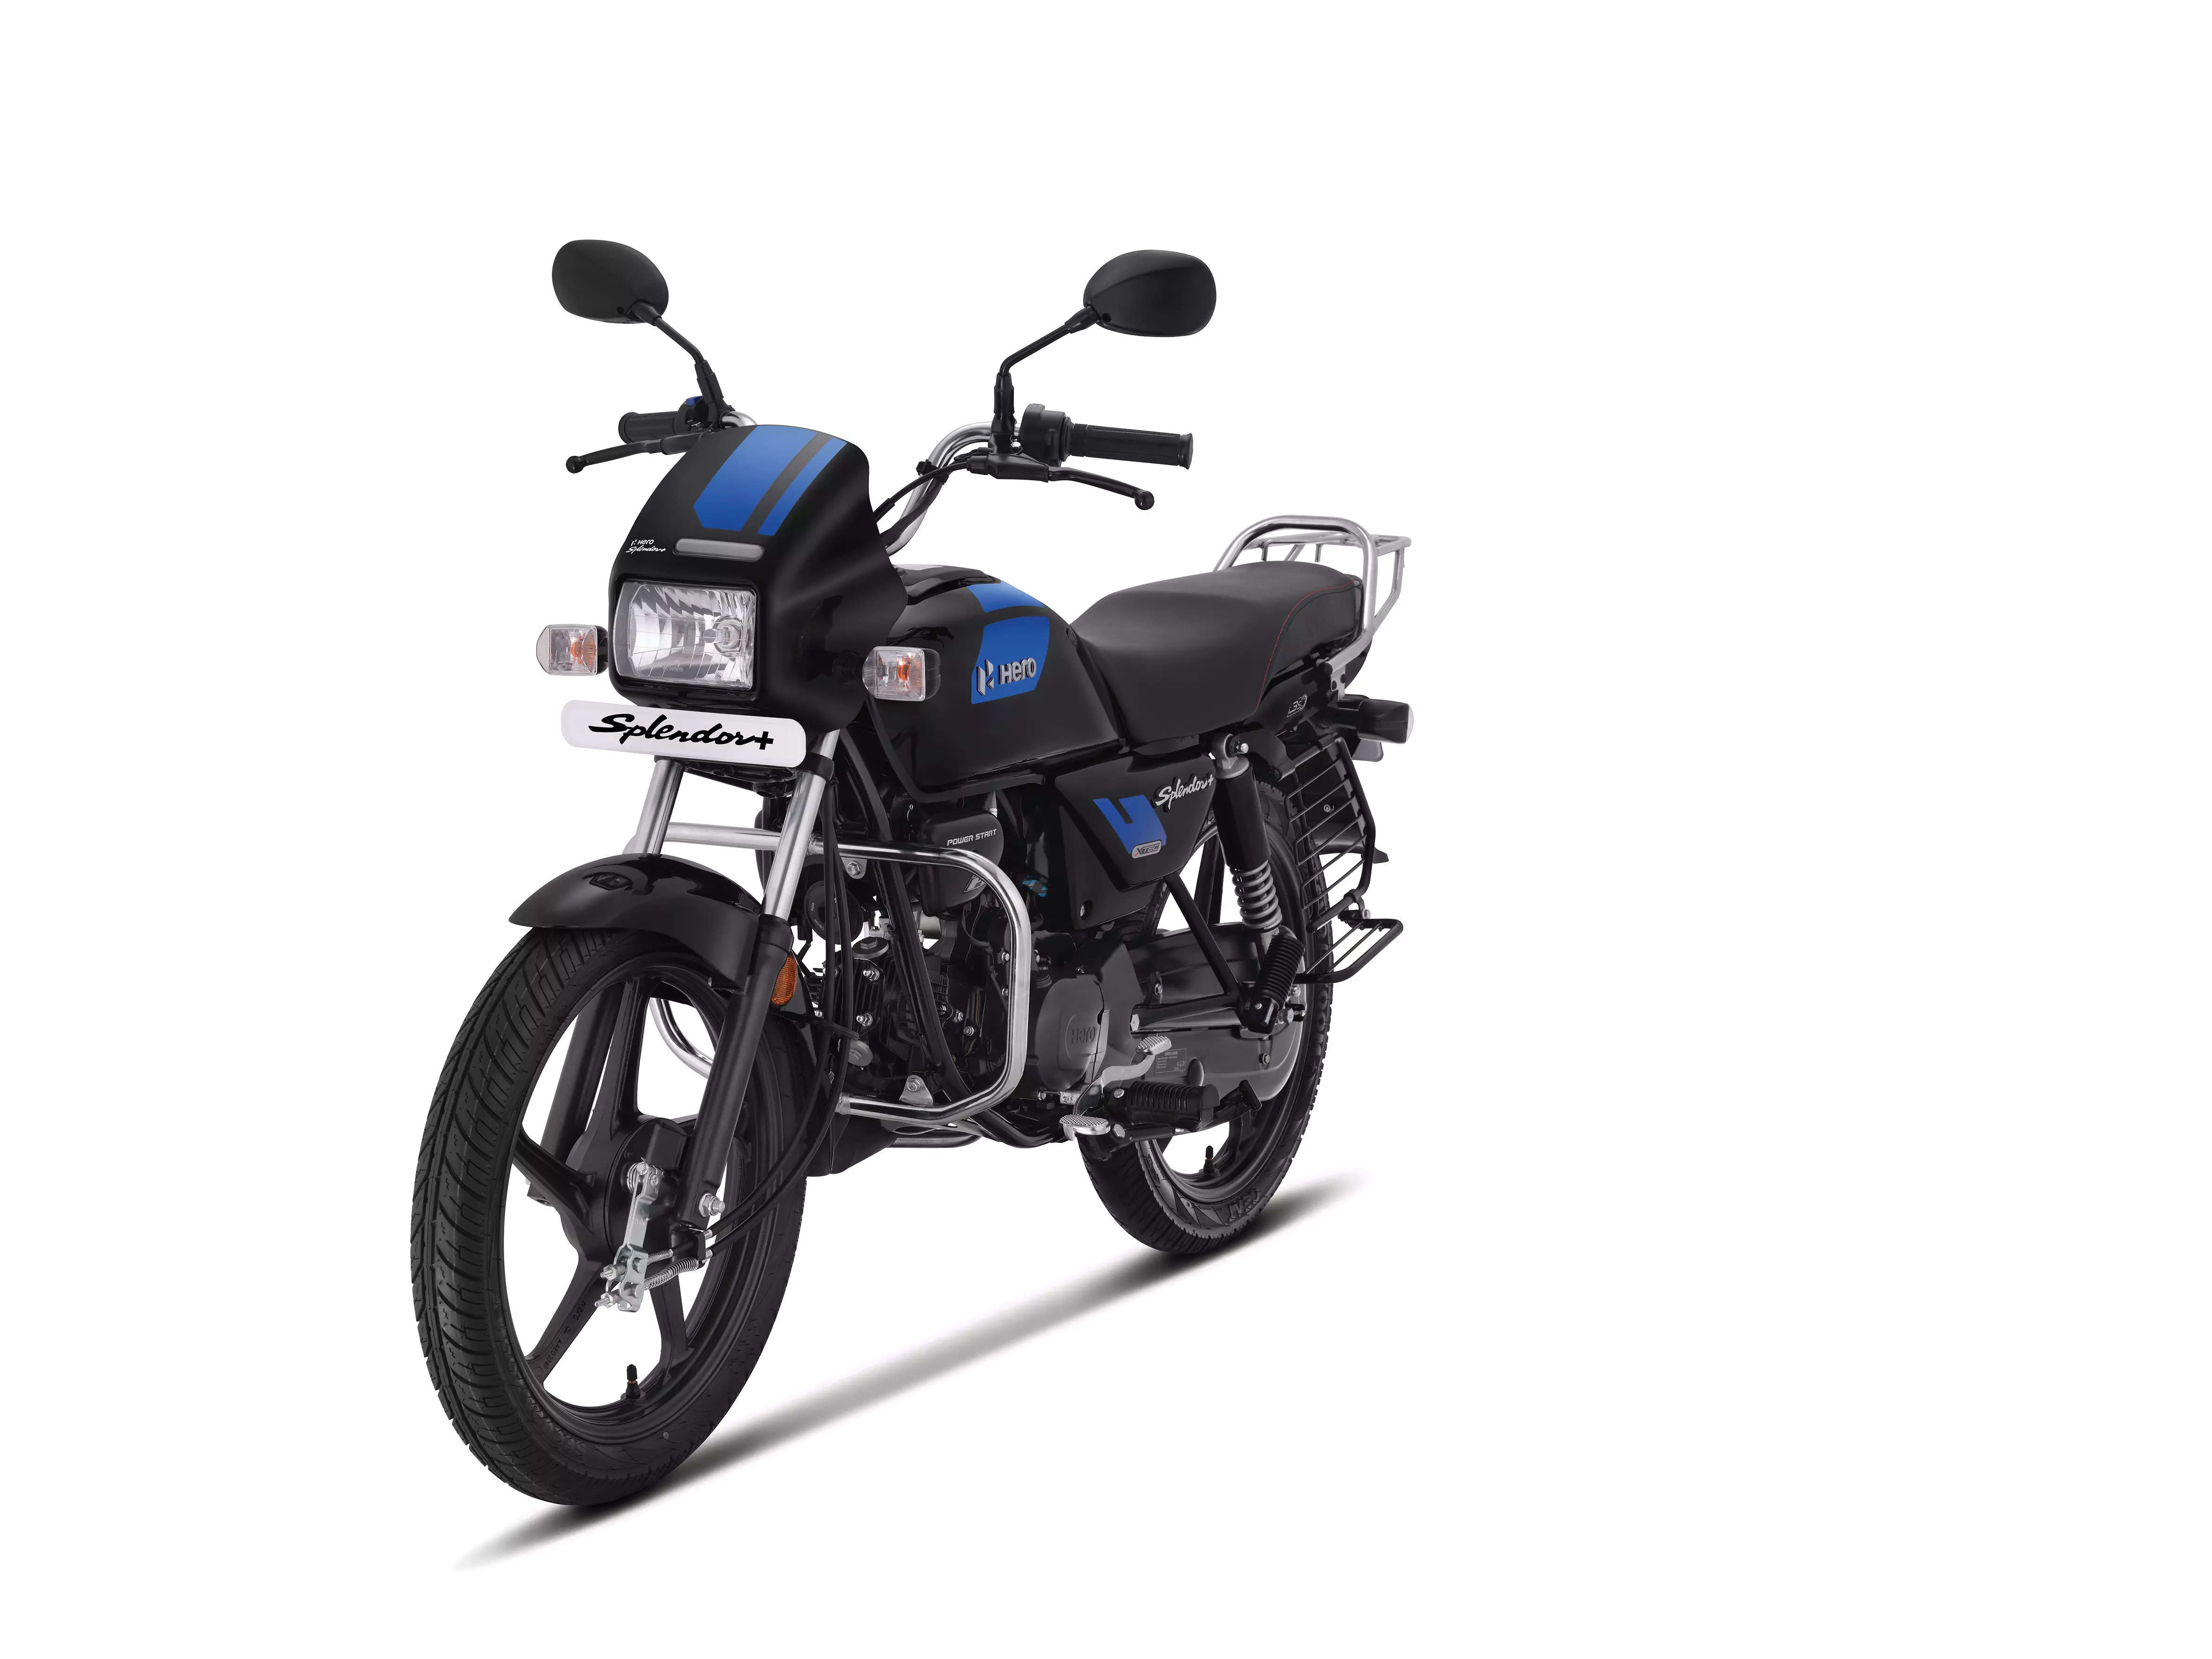 Hero Splendor+ XTEC Price: Hero Splendor+ XTEC launched at a price of Rs  72,900 | - Times of India